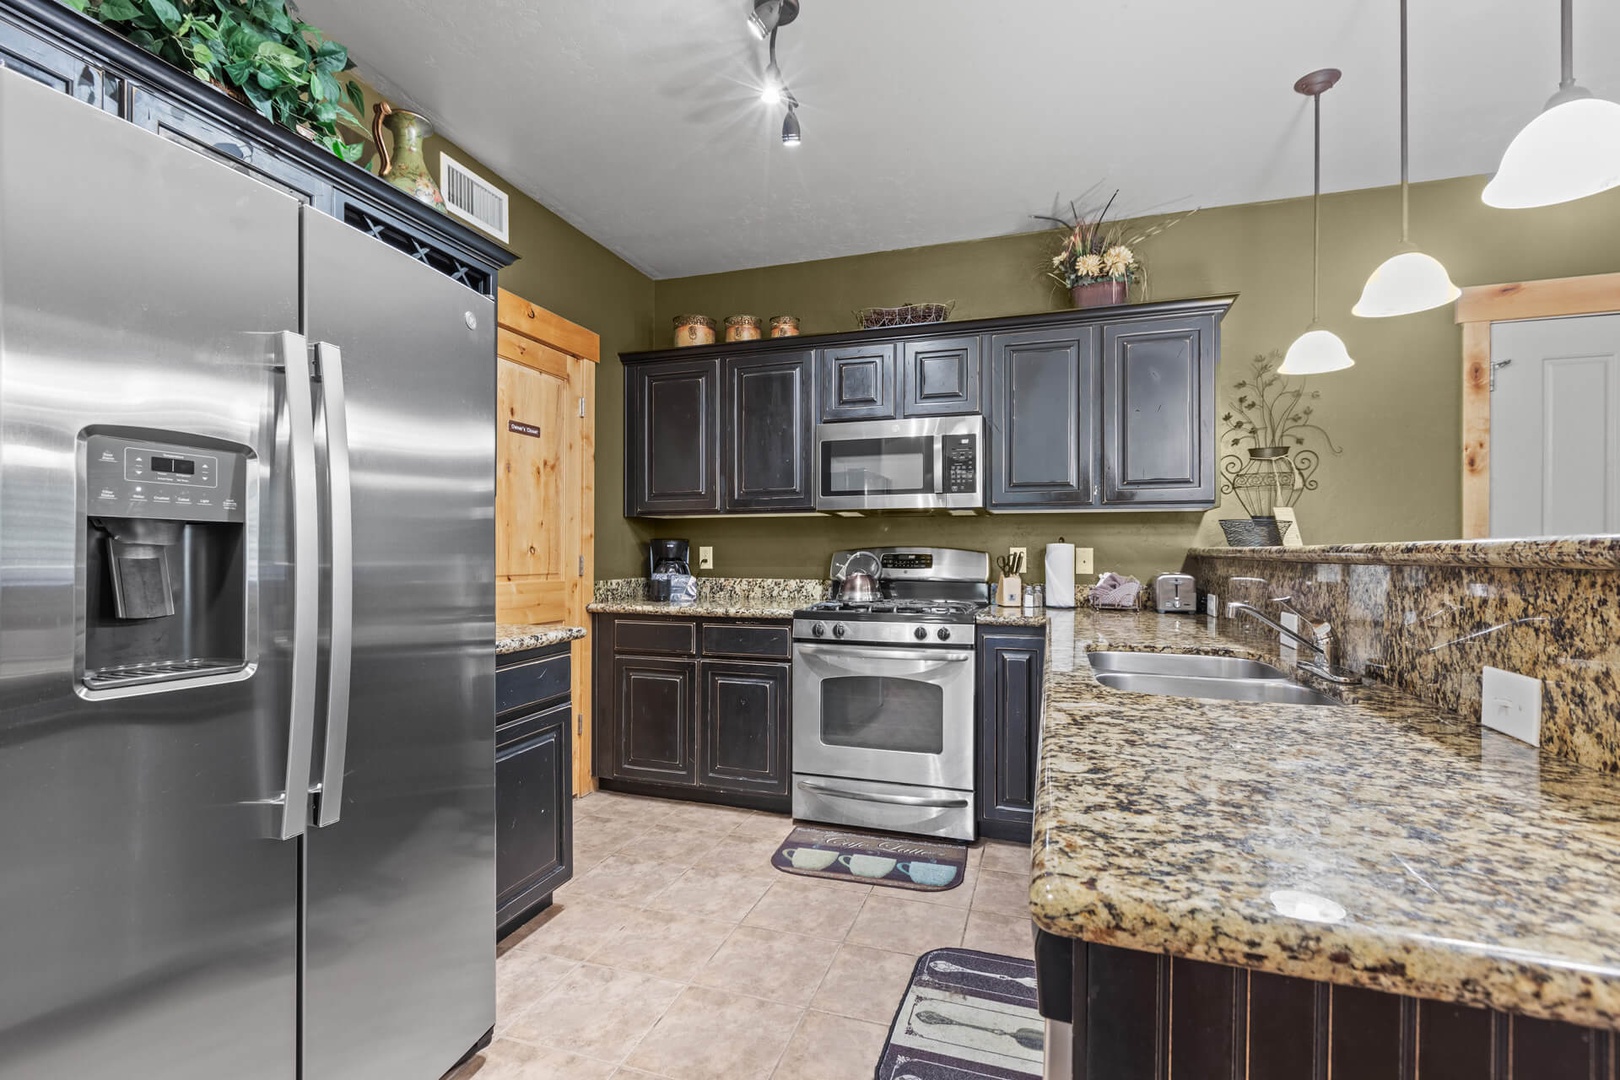 Bear Hollow Lodges 4201: Gleaming granite countertops with tons of workspace, fully equipped with large modern appliances and ample supply of utensils for convenient stay-in meal preparation.